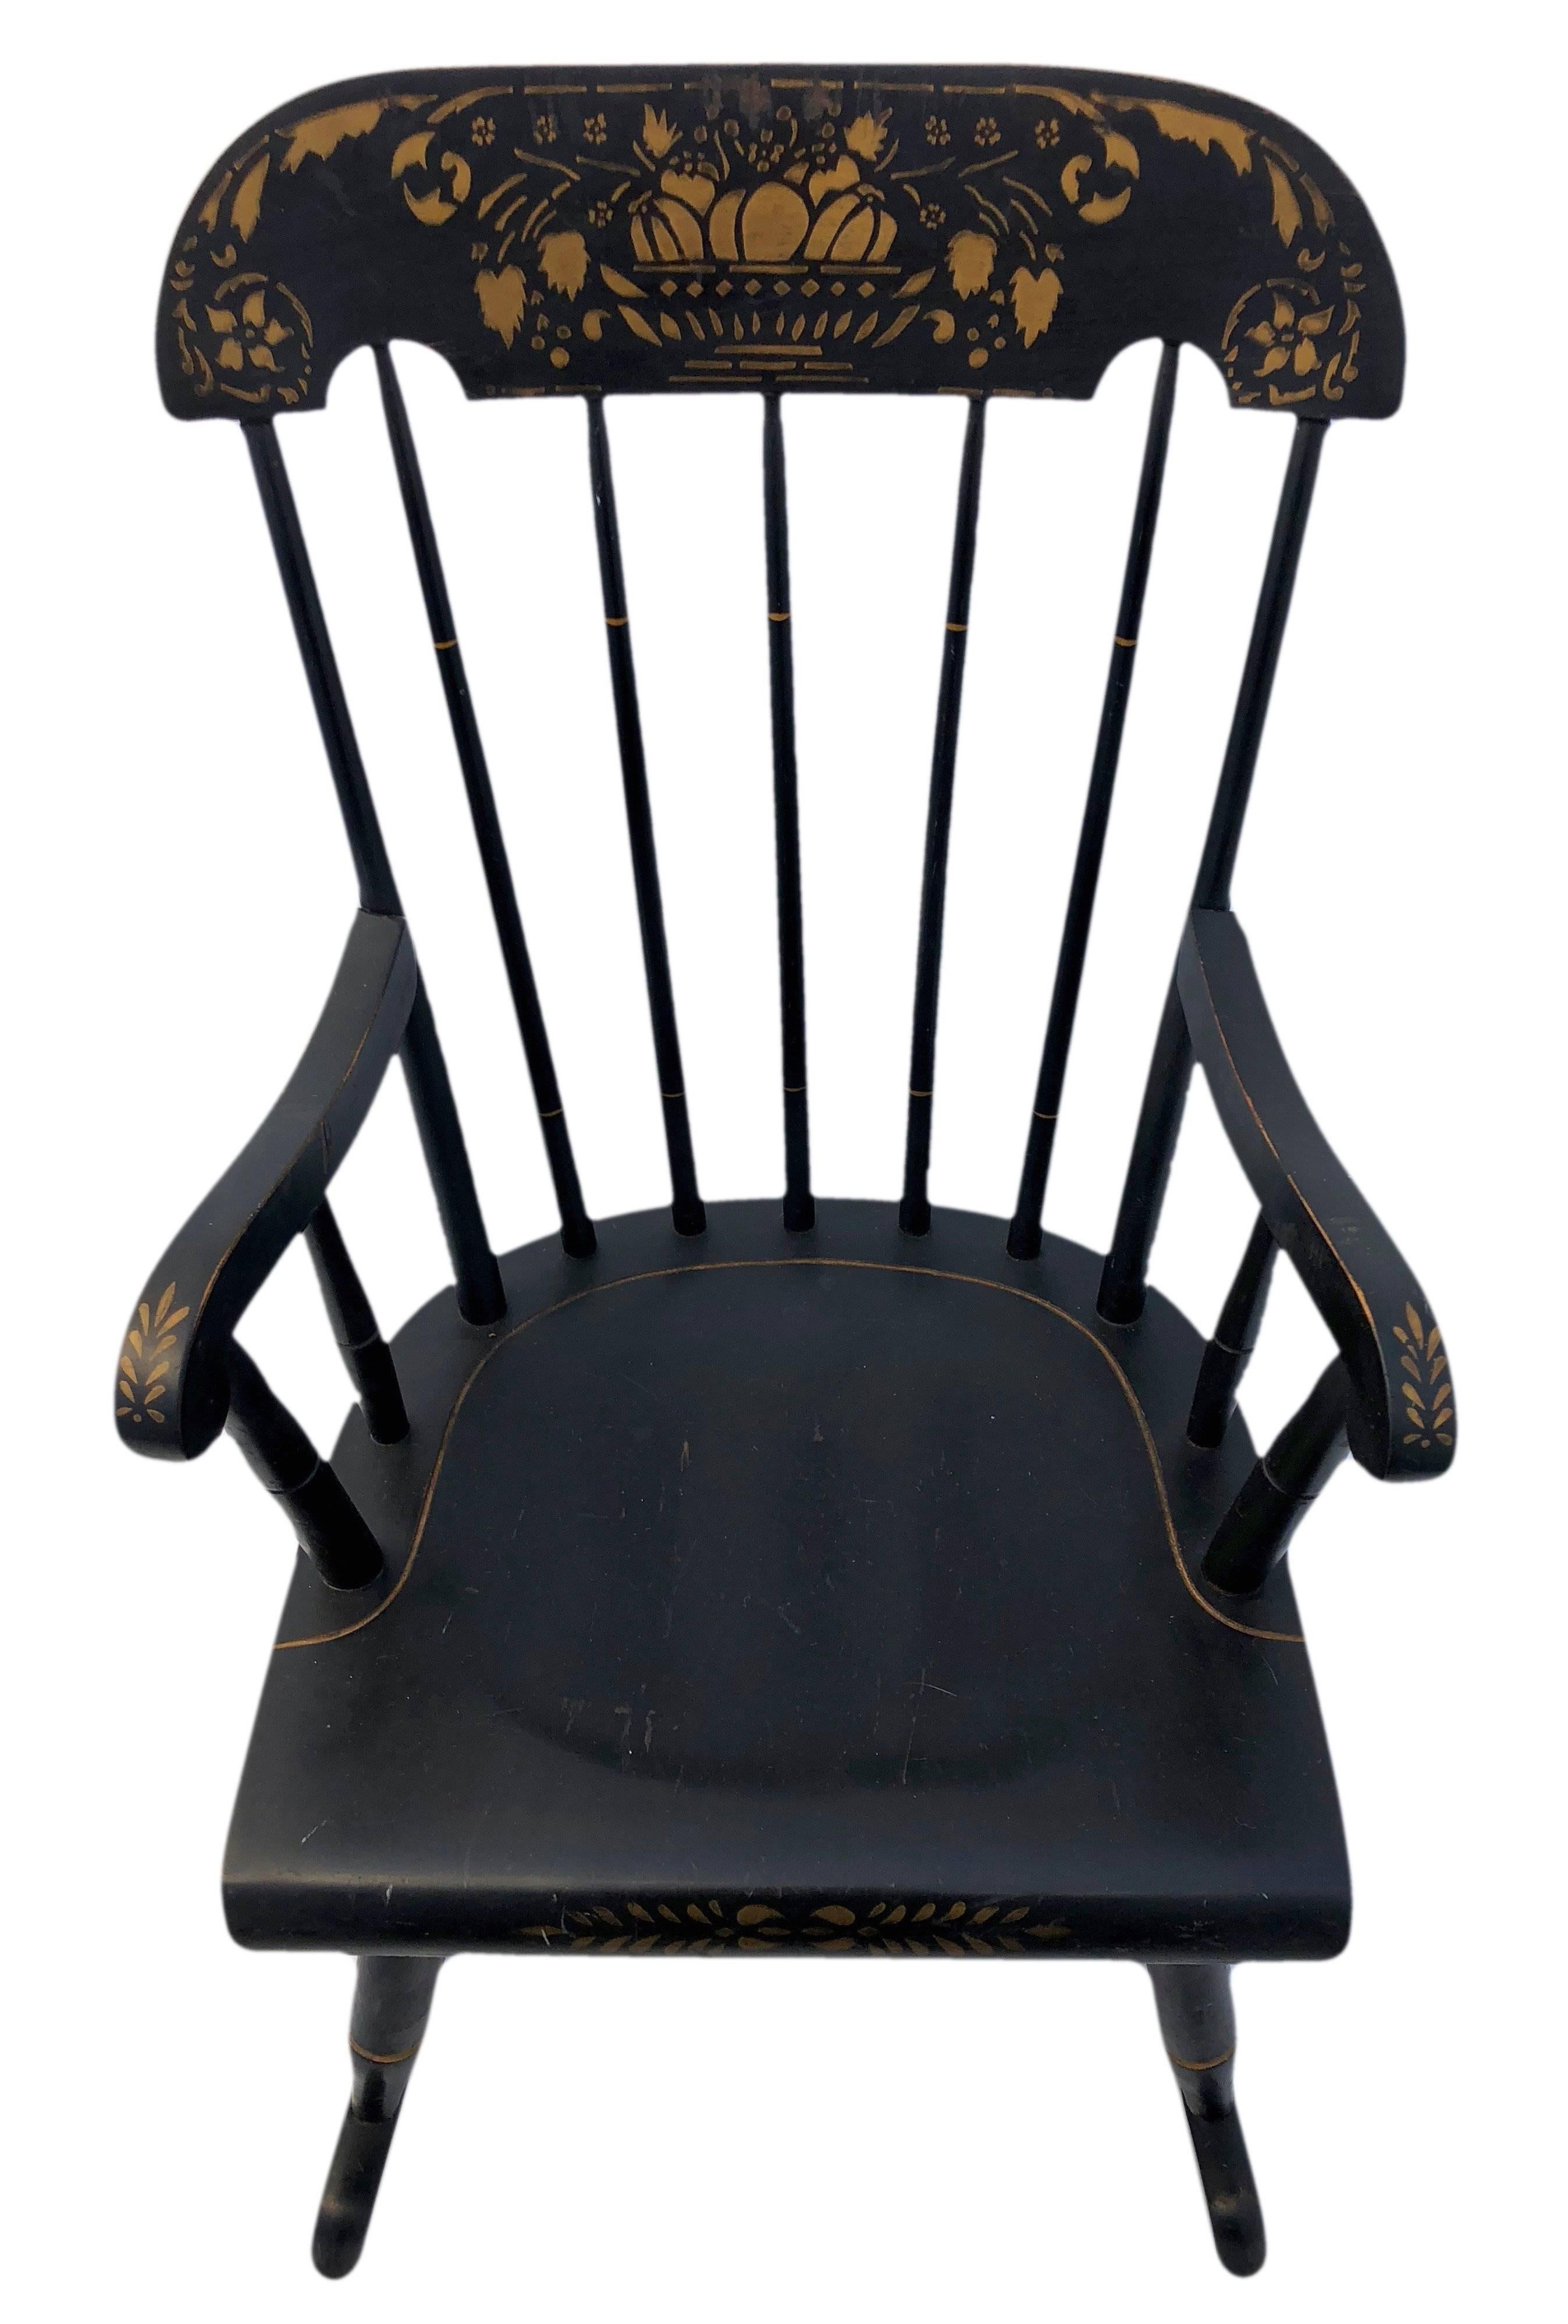 These are a pair of adorable Hitchcock style child’s rocking chairs. The Windsor rocking chair features a classic style with wide carved top rail, spindle back, short curved arms with spindle support, and long platform rockers. The chairs have been